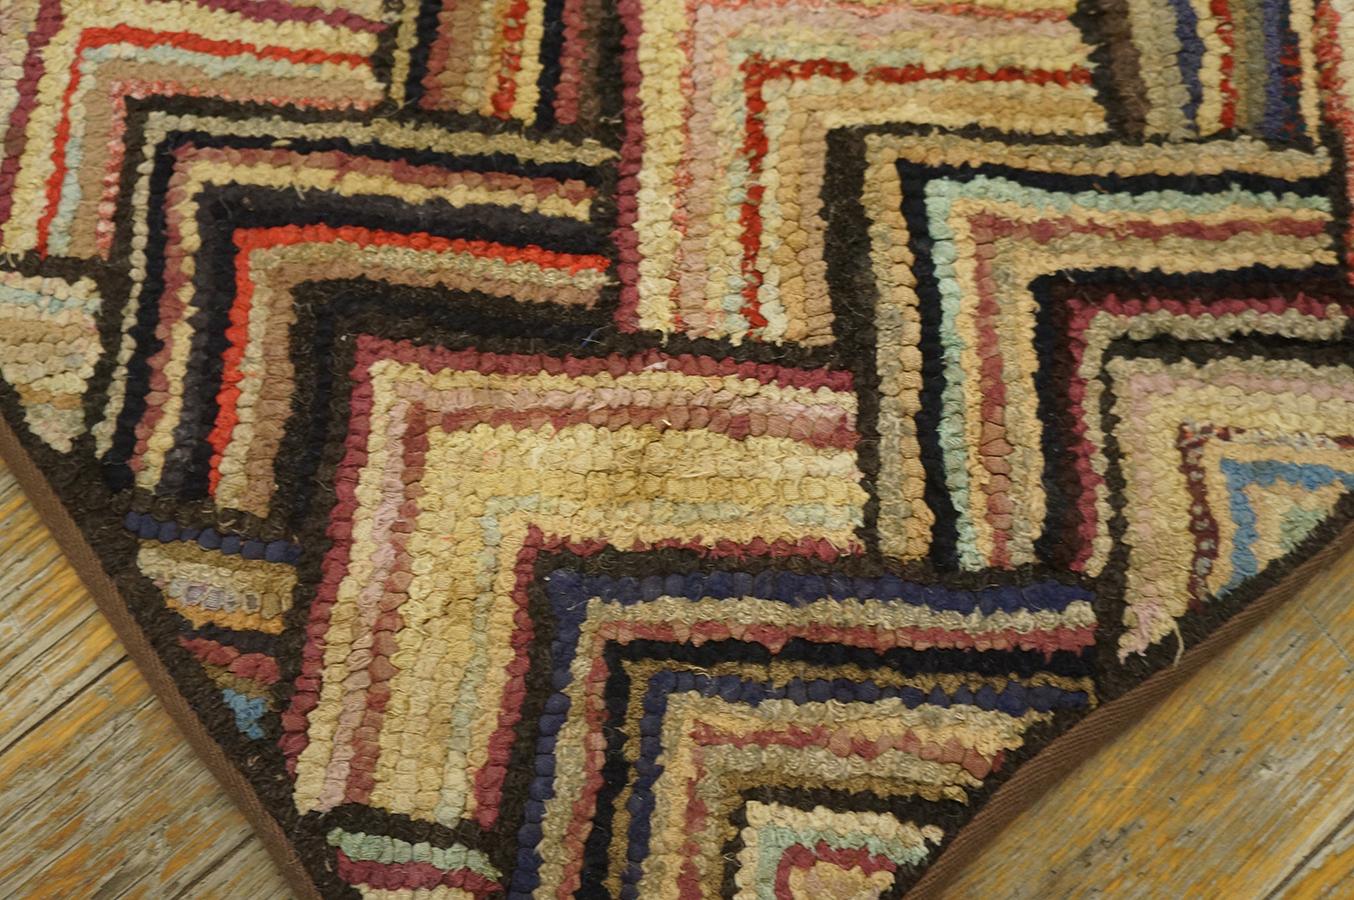 Early 20th Century American Hooked Rug ( 2' 7'' x 4' 6'' - 78 x 137 cm ) For Sale 2